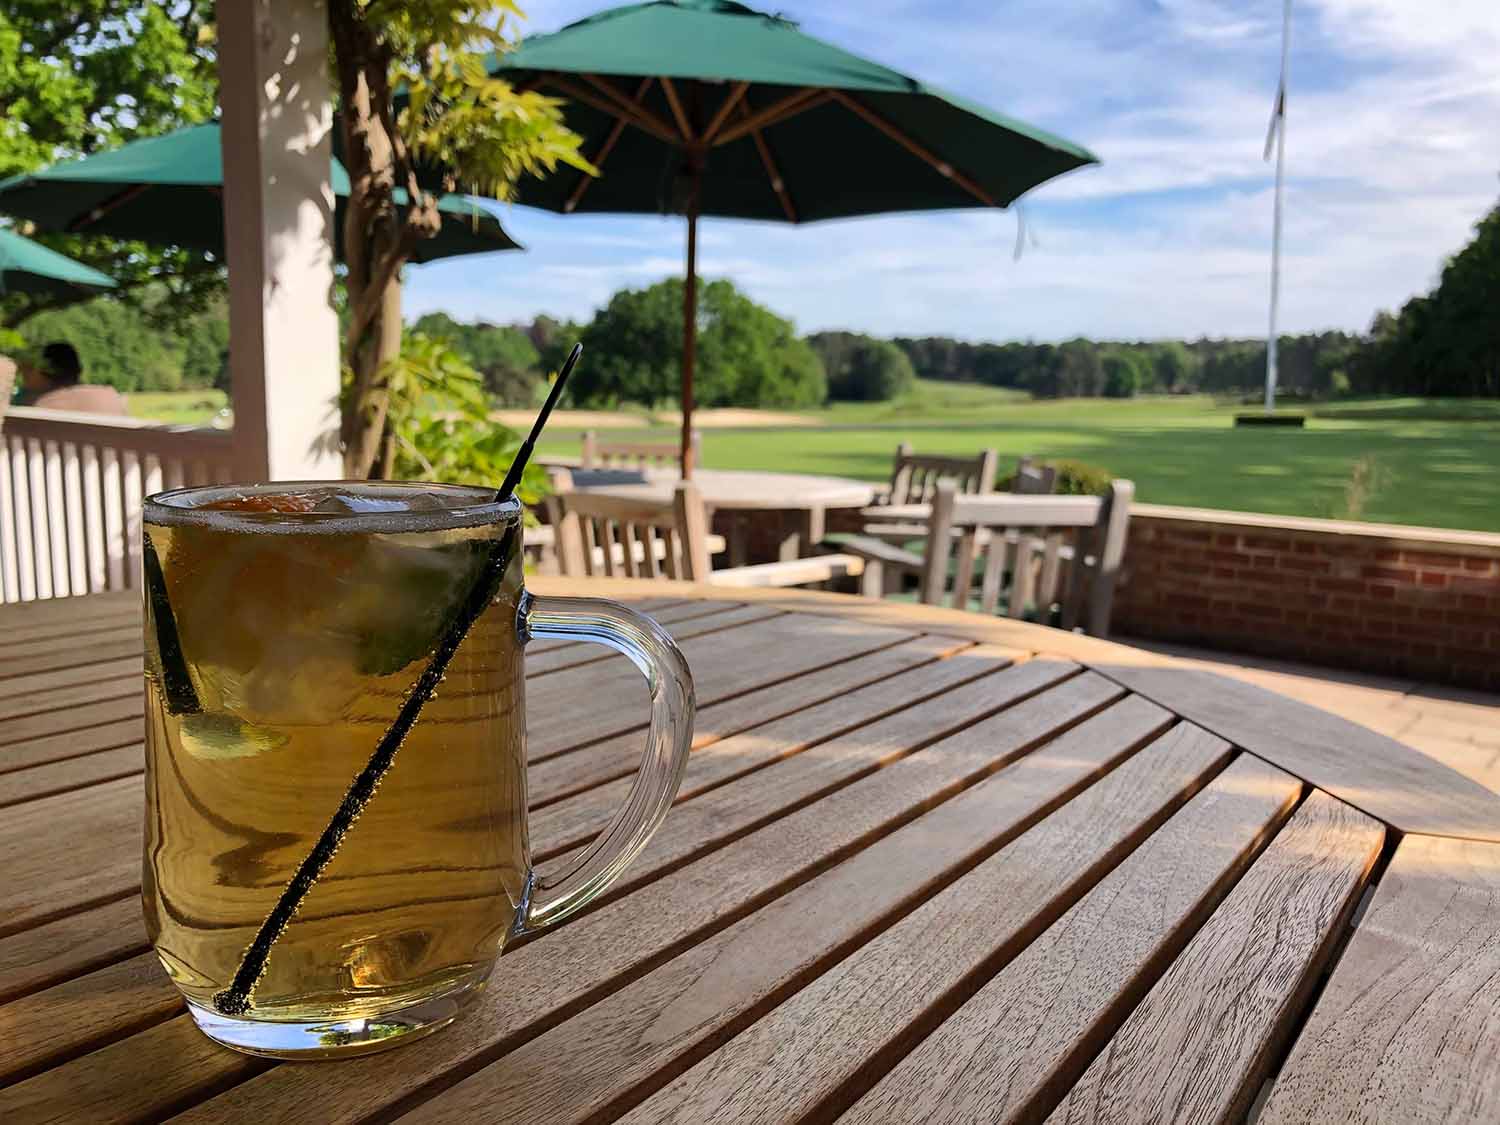 Clubhouse Patio with Pimm's Lemonade at Sunningdale Golf Club